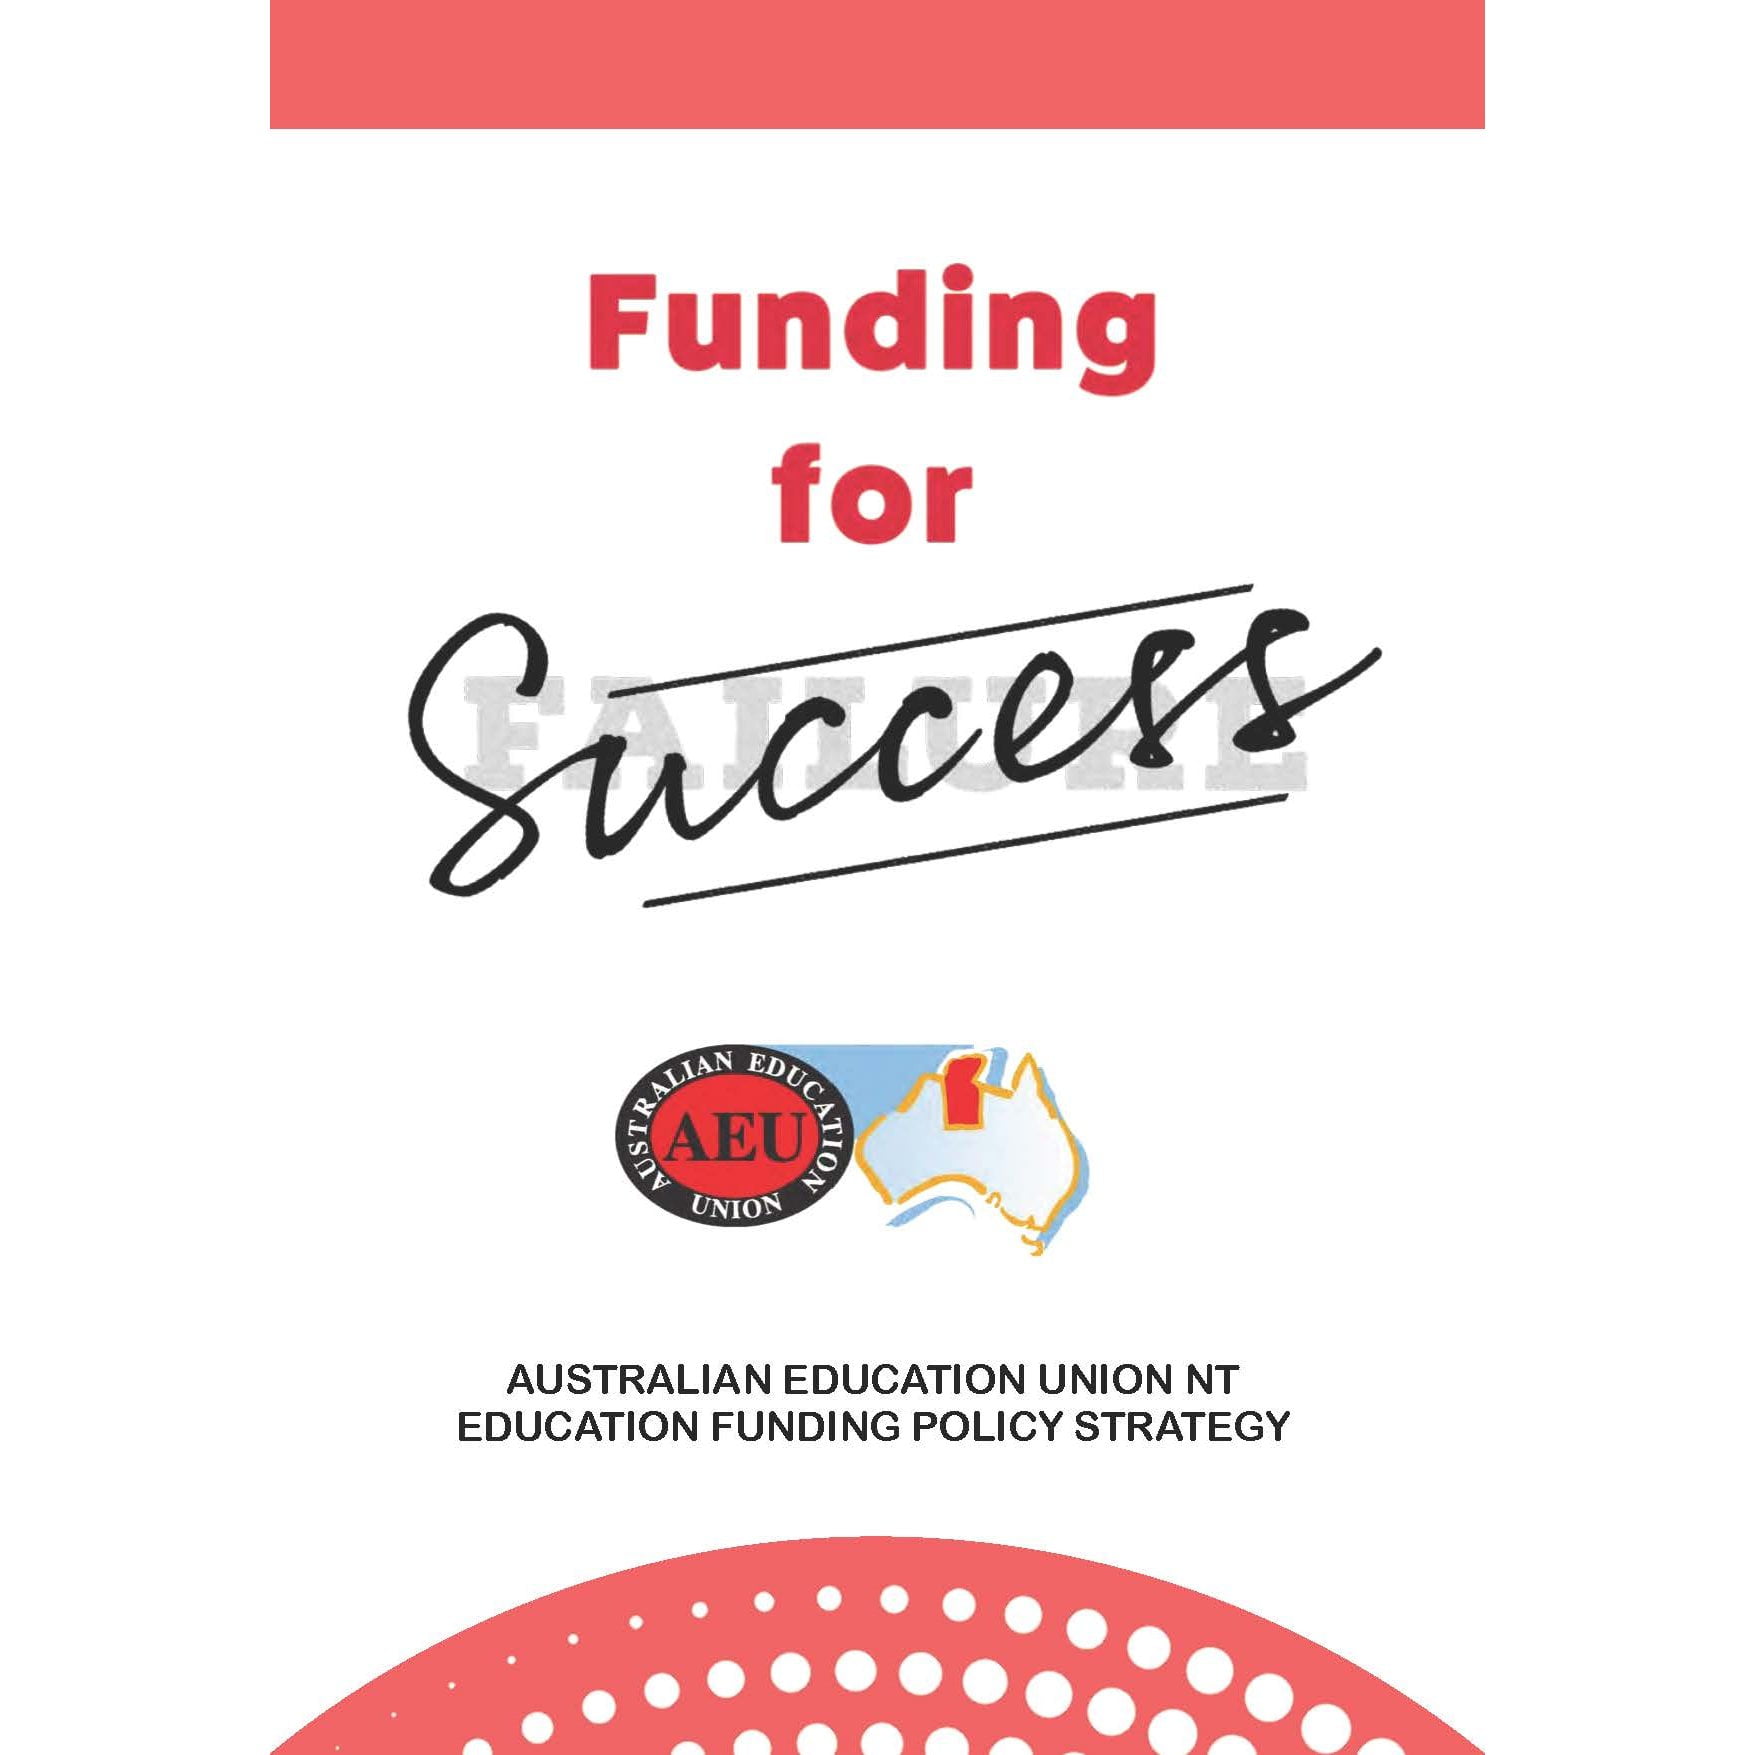 AEU NT education funding policy strategy poster.